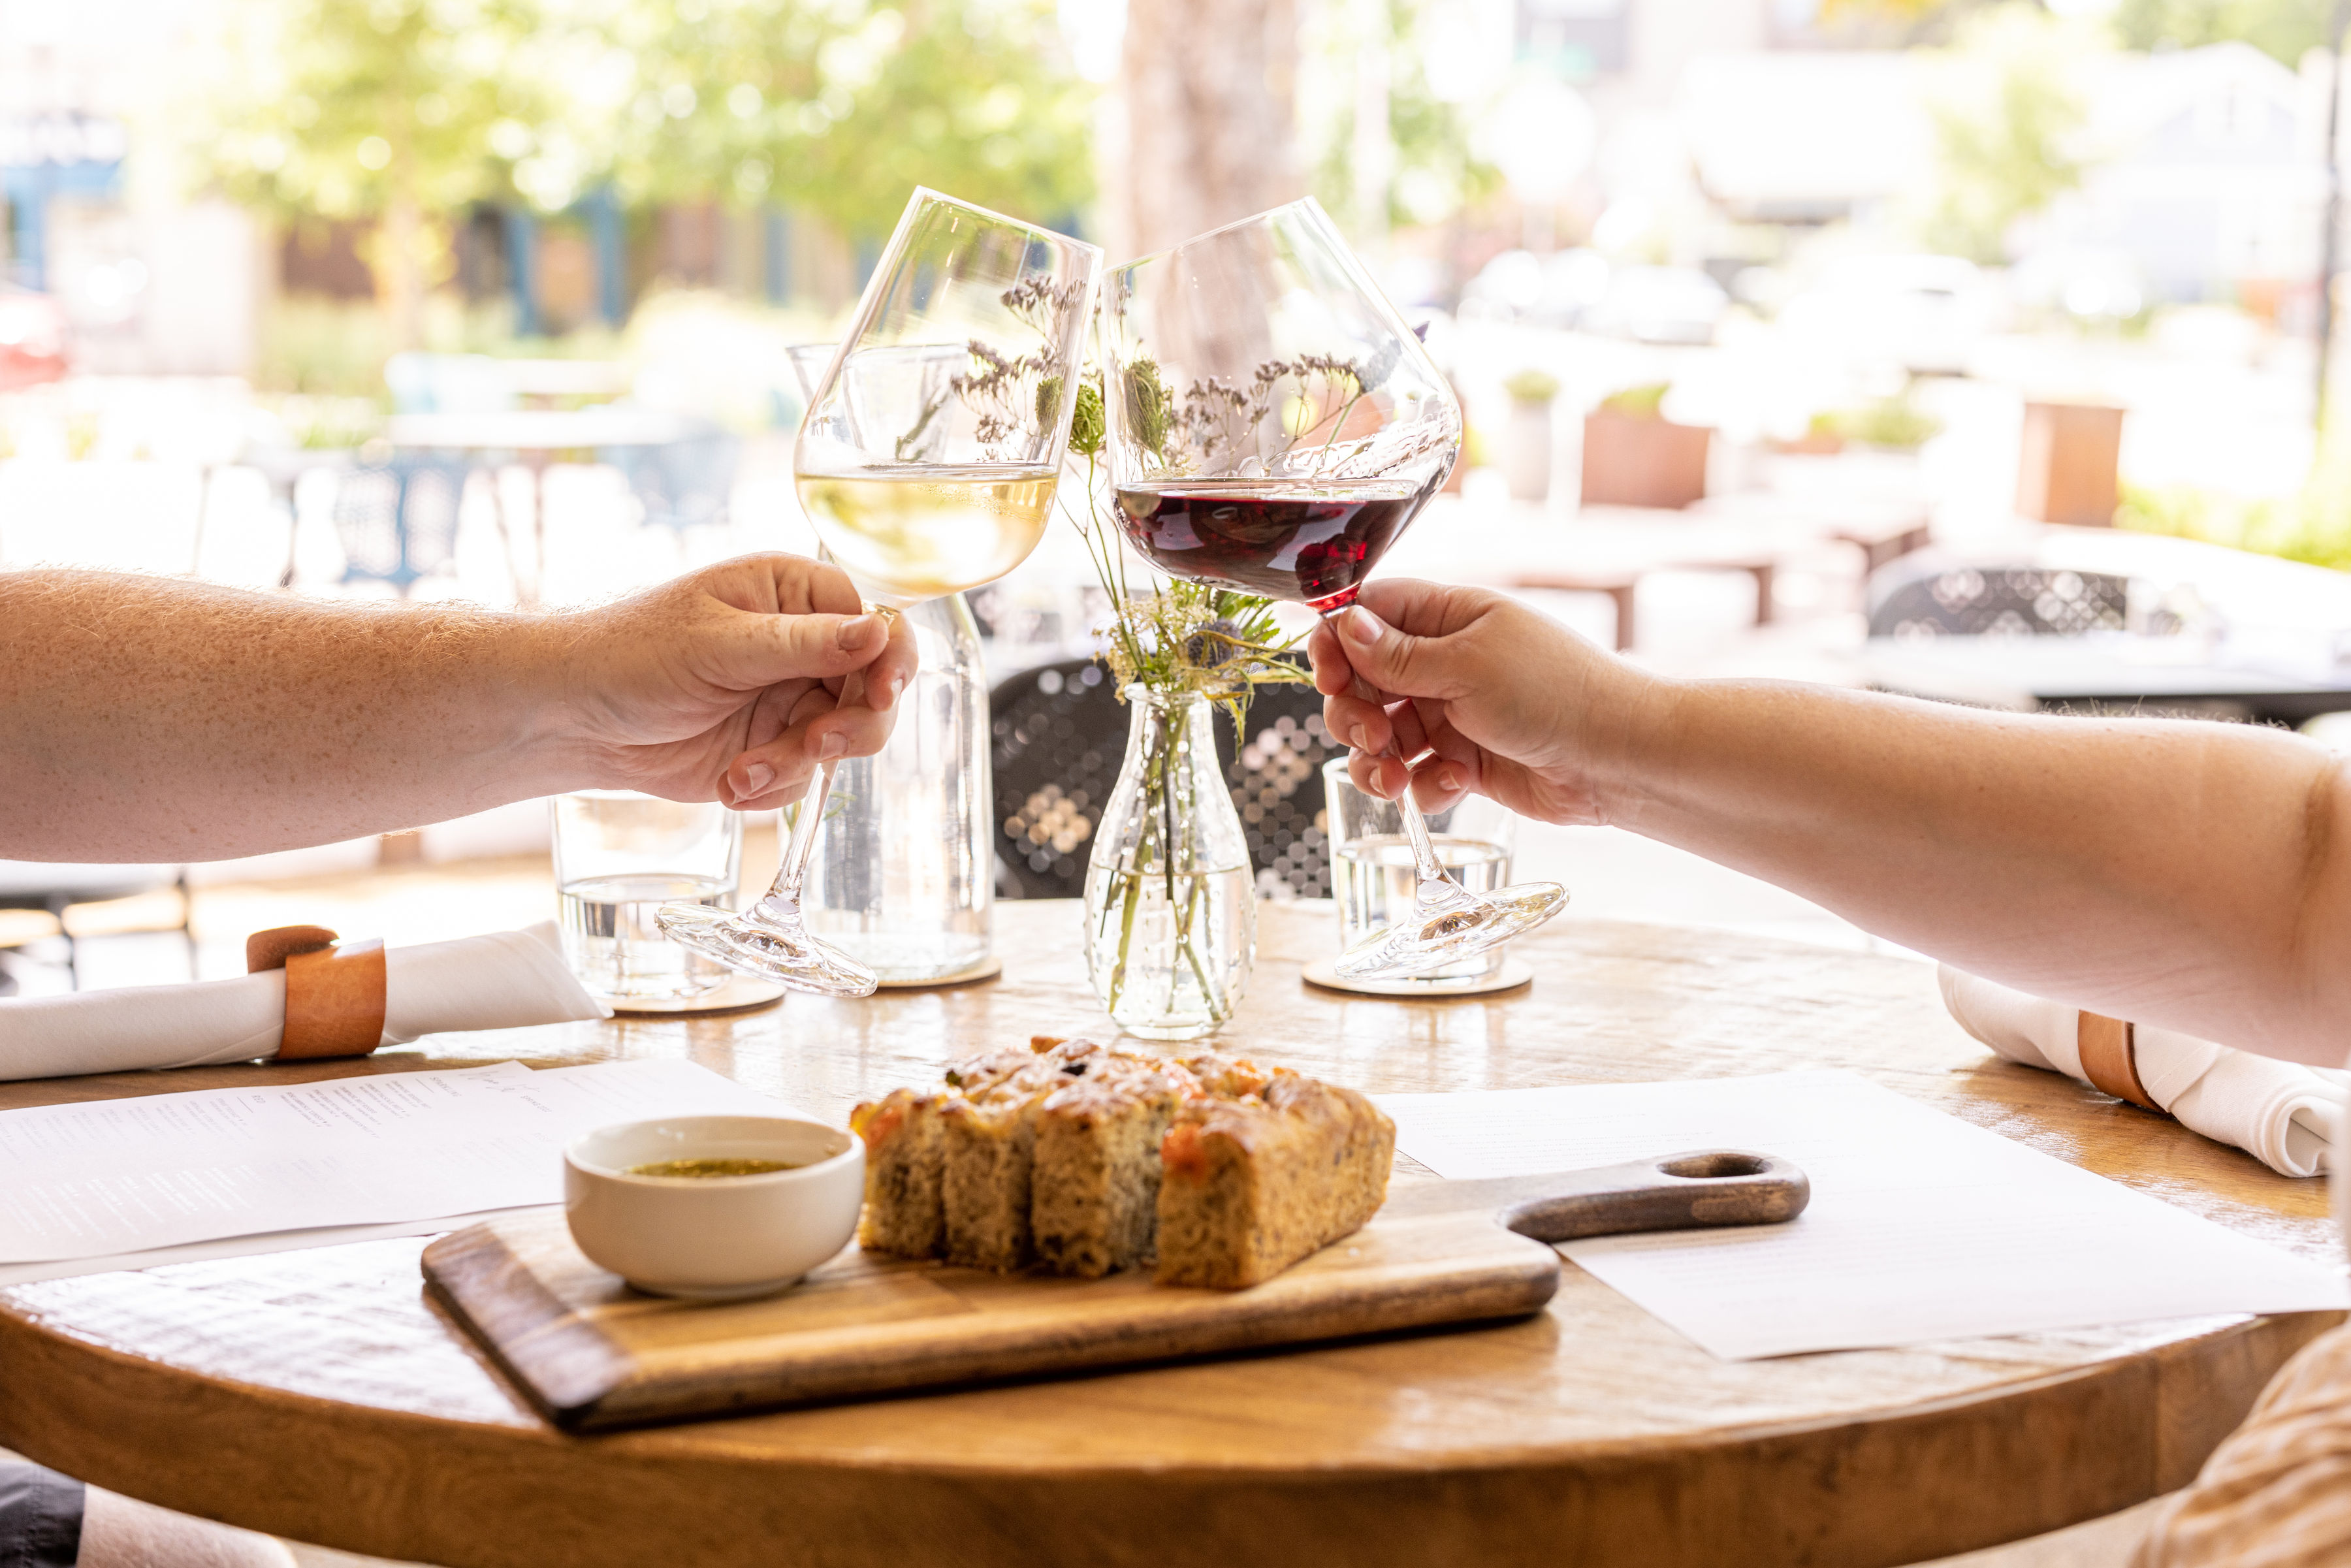 A pair of hands cheers with two wine glasses over a table with bread and other accouterment. 